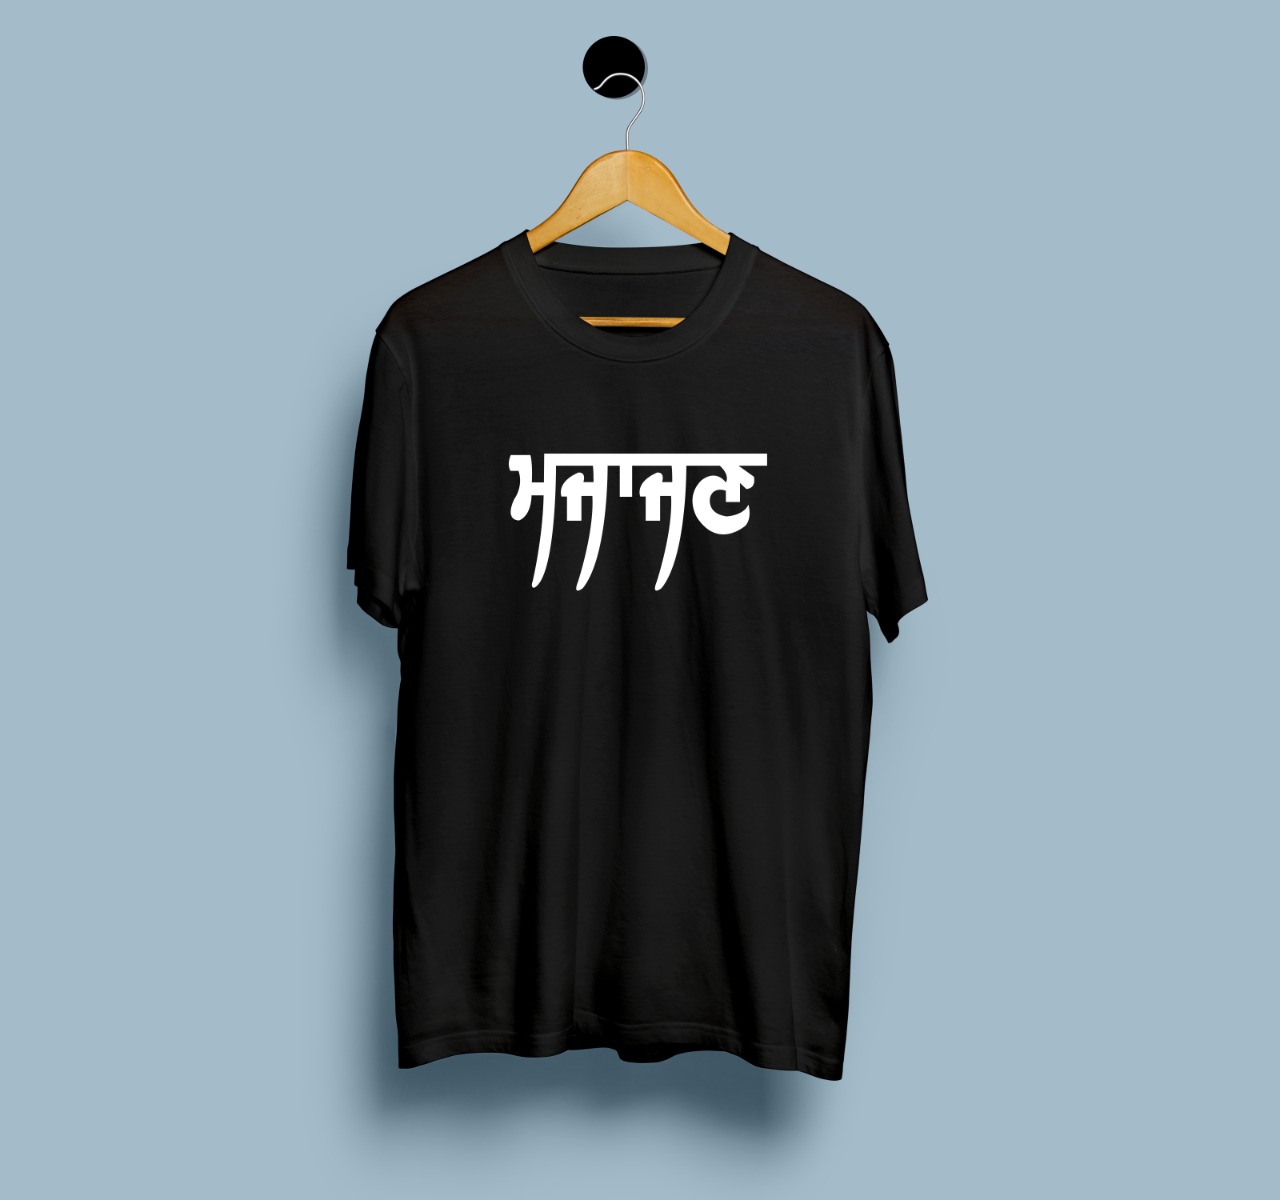 ATTITUDE T-shirt - Printed Graphic T-shirts For Men Online in India